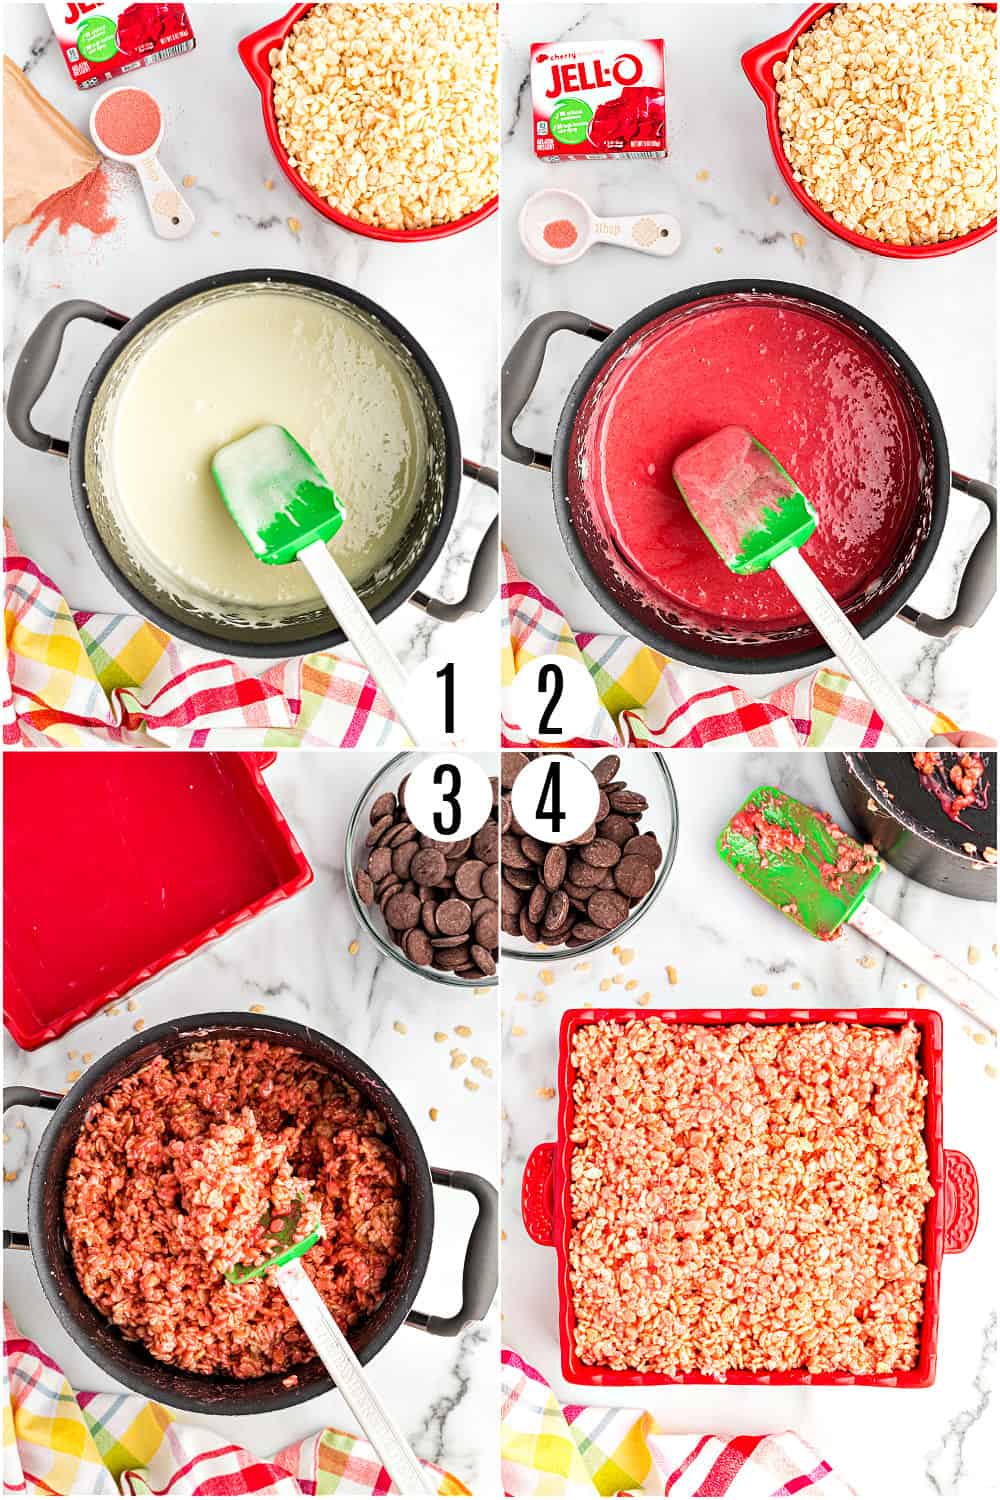 Step by step photos showing how to make cherry krispie treats with gelatin.